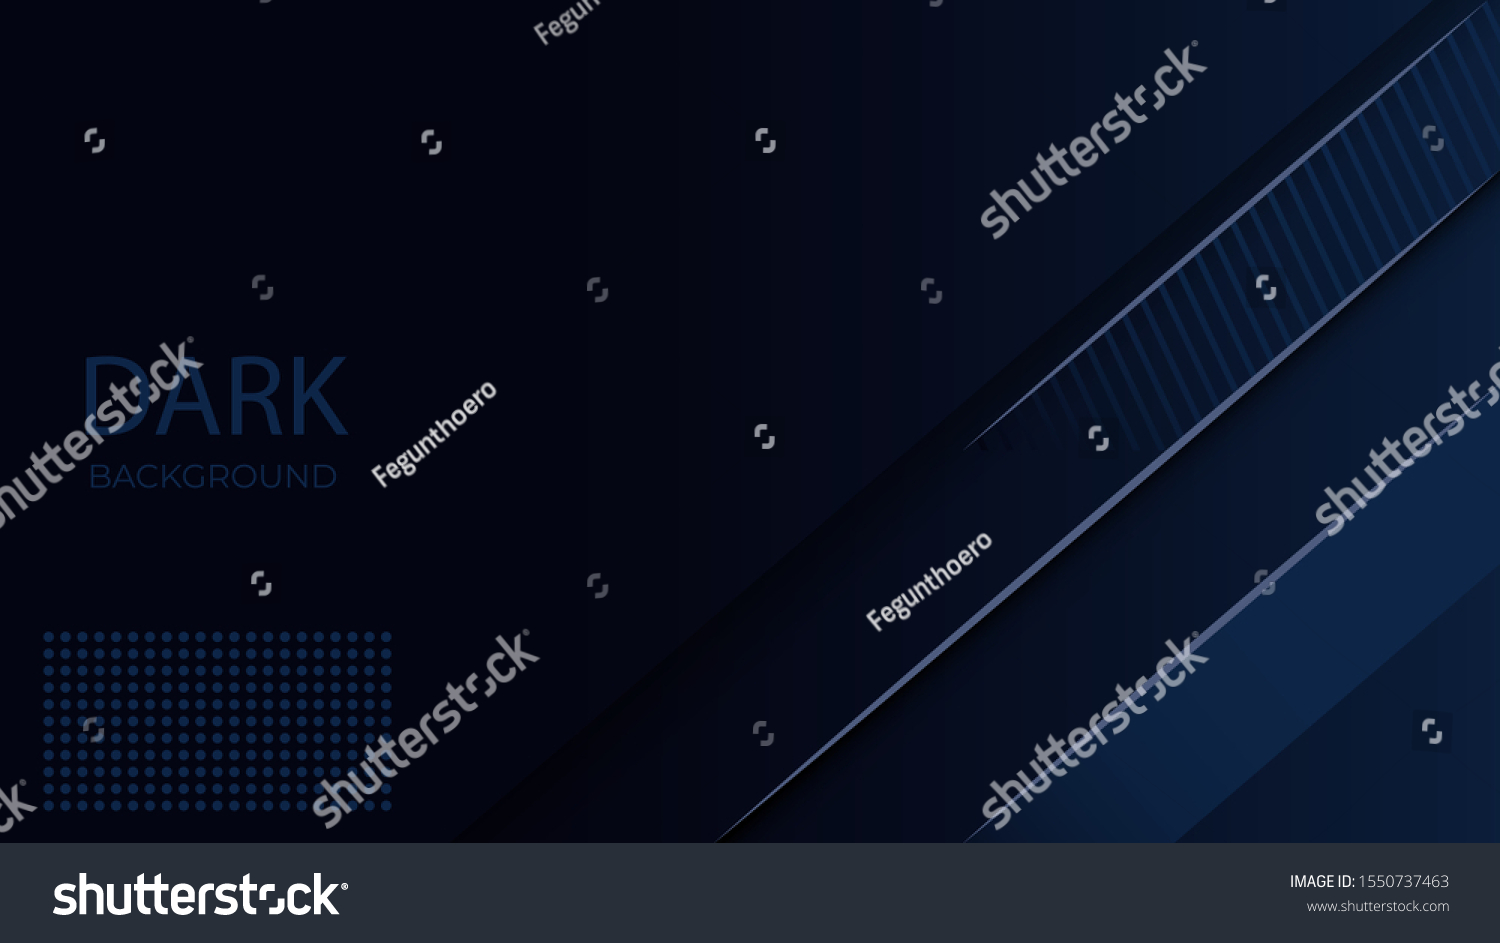 vector graphic design Dark Black Blue modern abstract background wallpaper for business, company, office, corporate, web, presentation, publication, advertising with side blank space EPS 10 #1550737463